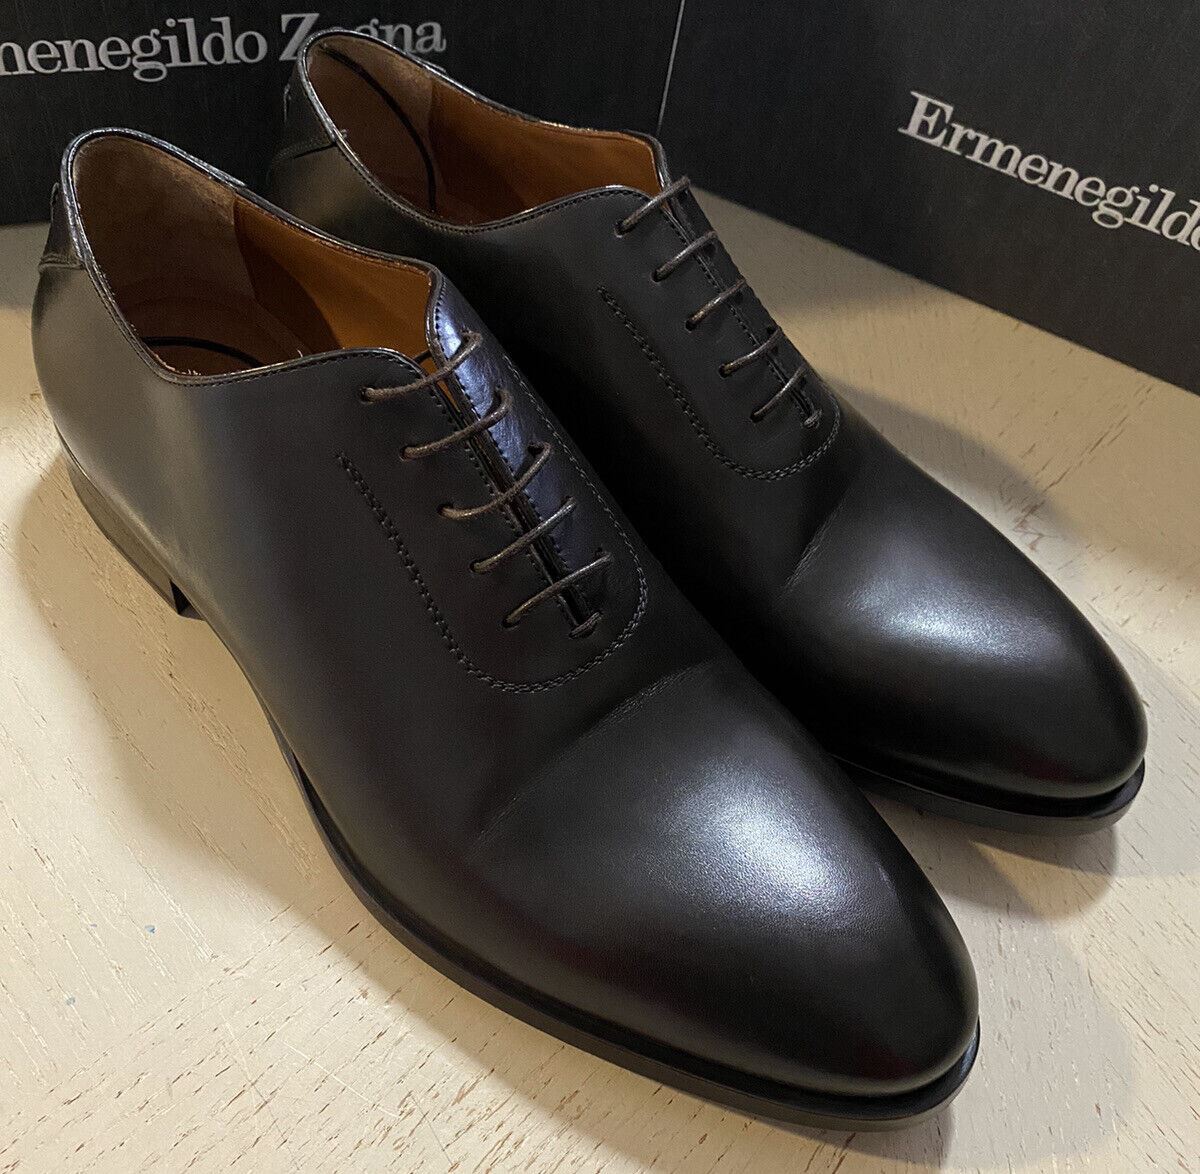 New $1250 Ermenegildo Zegna Couture Oxford Leather Shoes DK Brown 12 US Italy